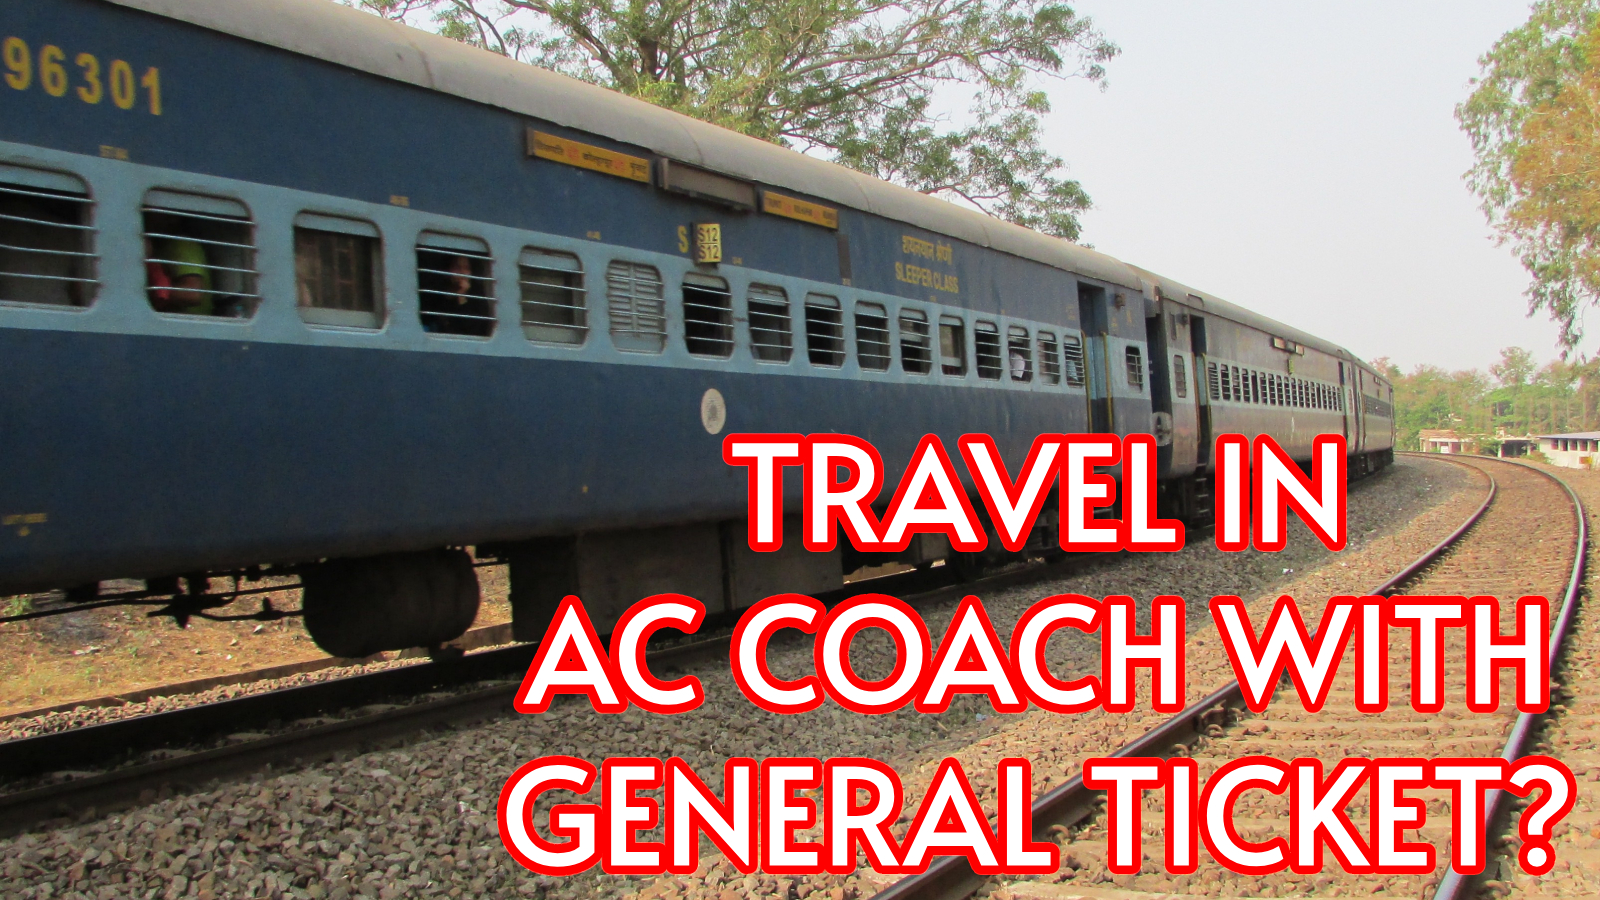 can you travel in an AC coach with a General ticket?